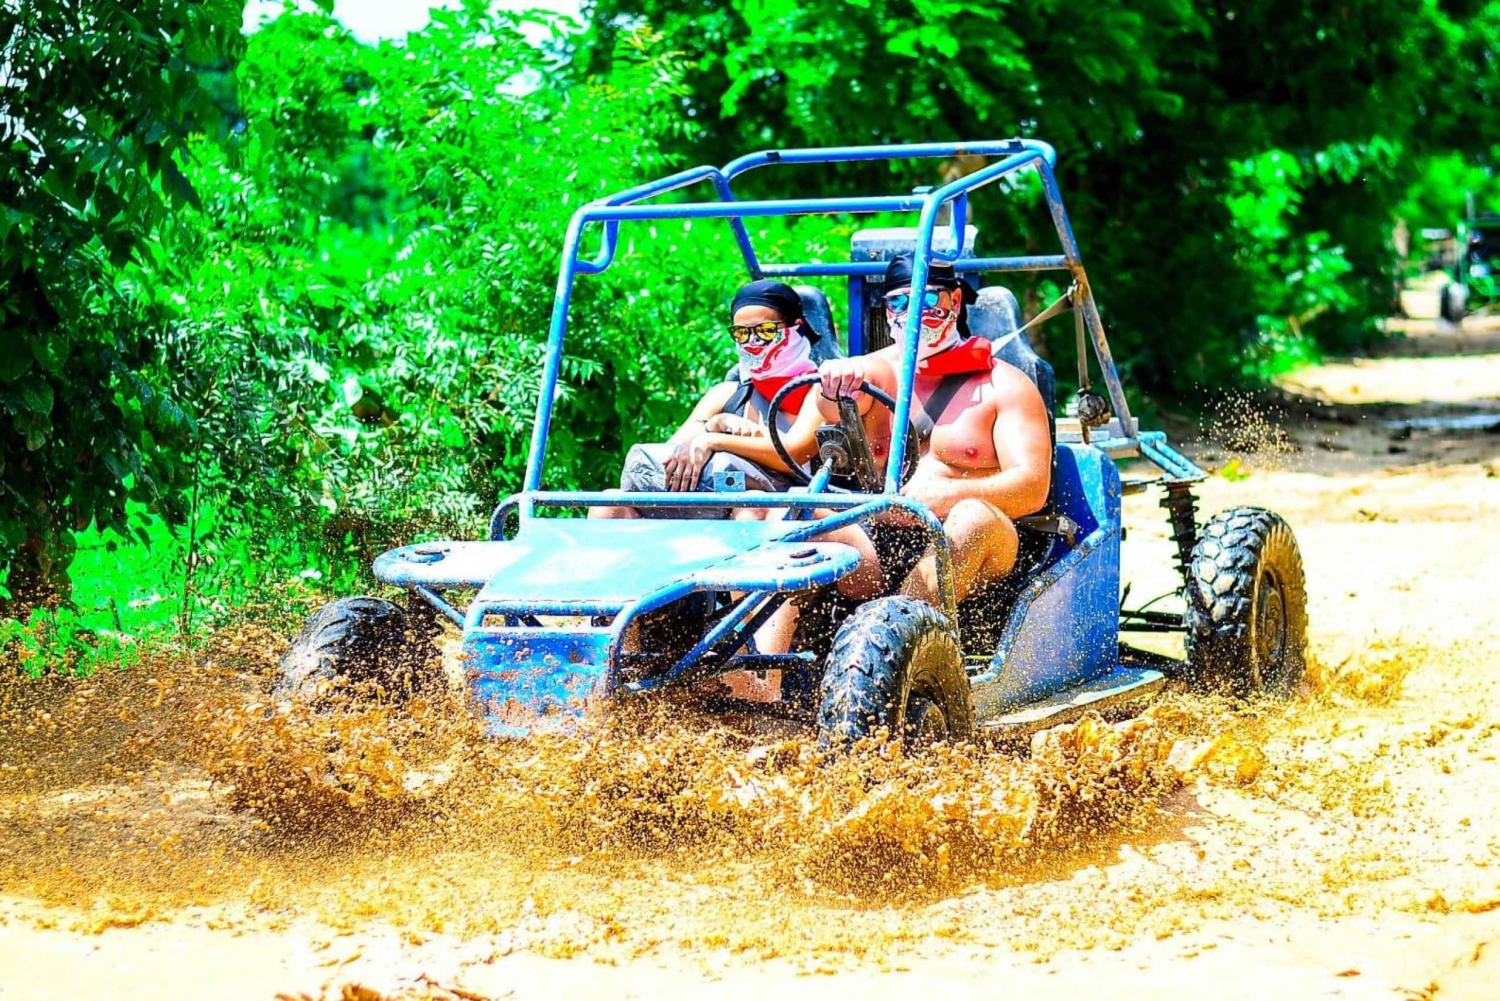 Punta Cana: Tour in buggy half-day and beach cenote